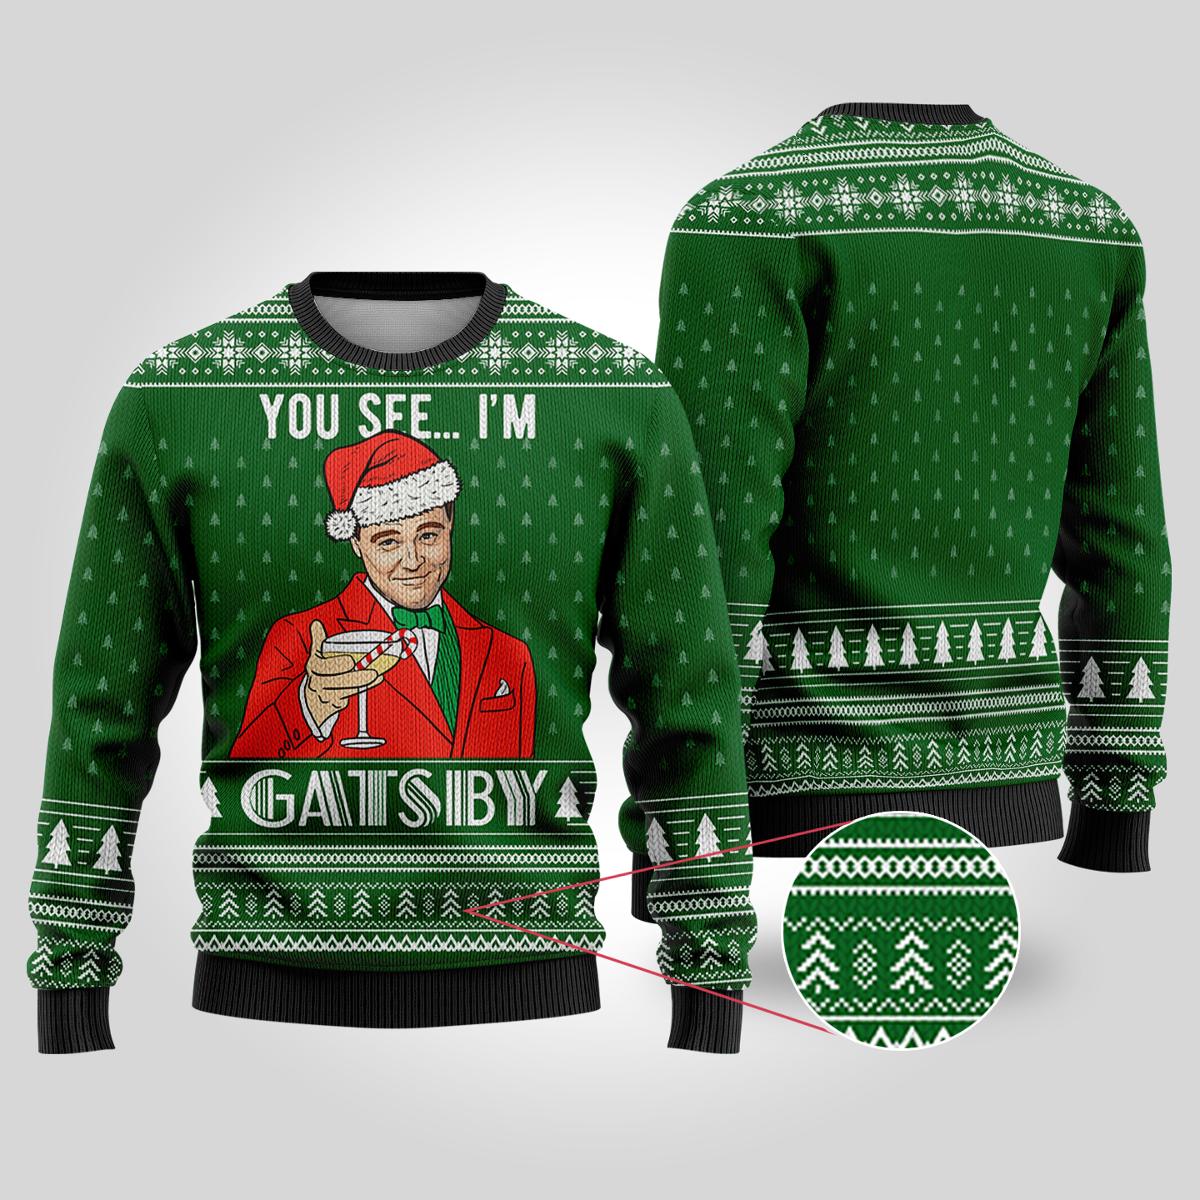 The Great Gatsby Leonardo Dicaprio Ugliest Sweaters For Christmas